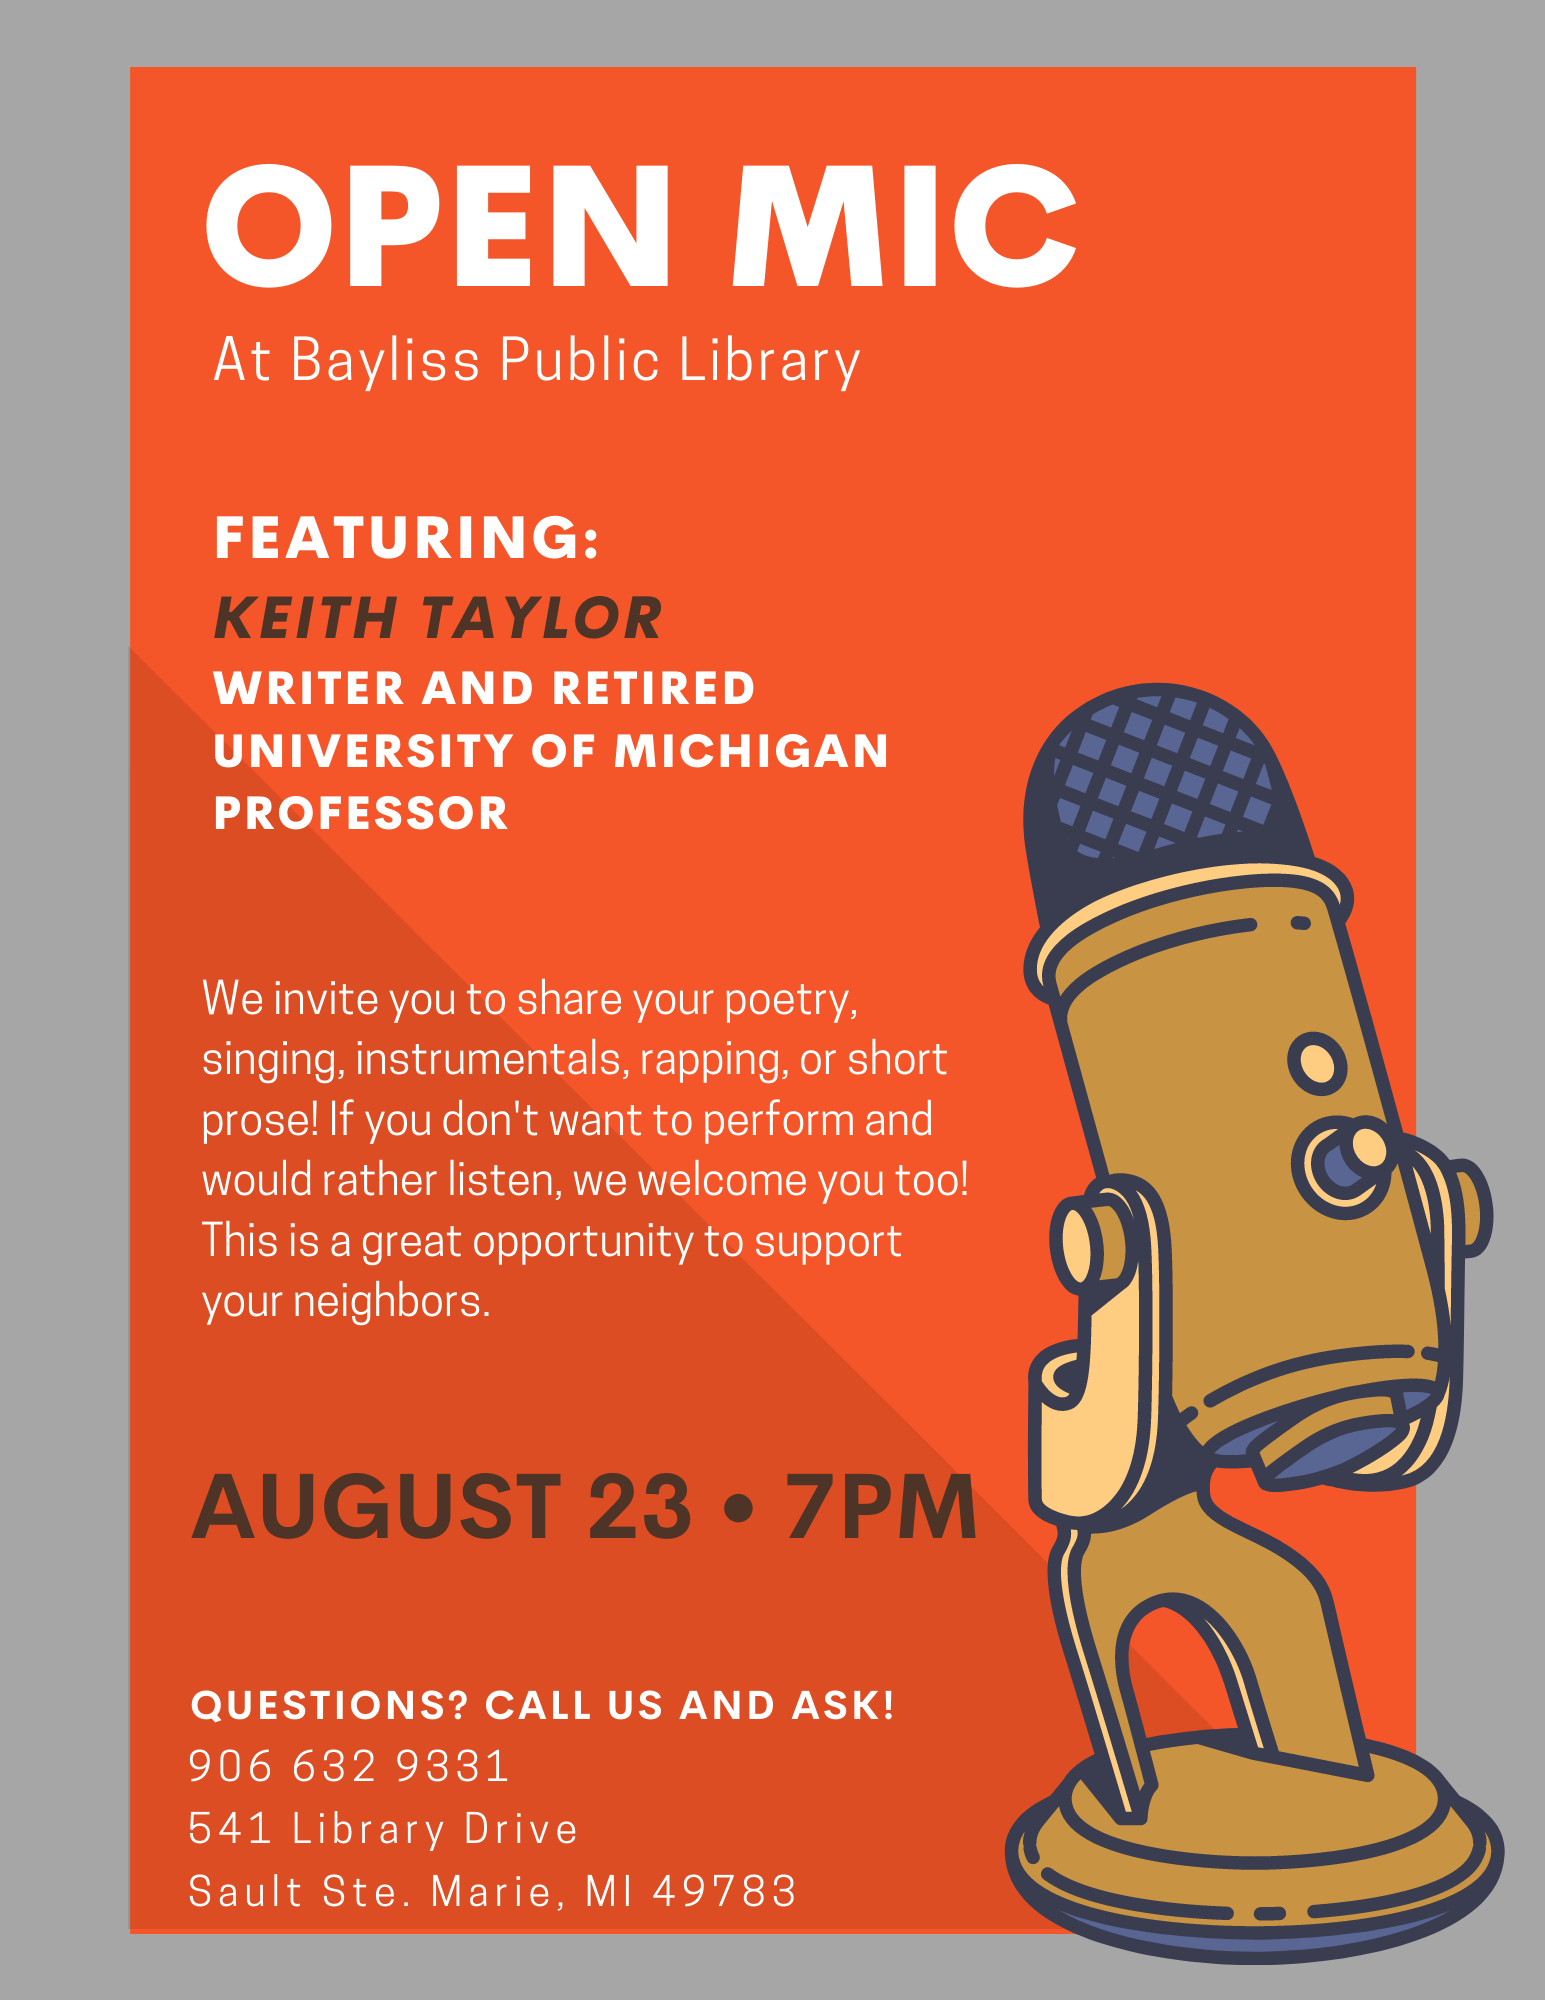 Open Mic night at bayliss public library